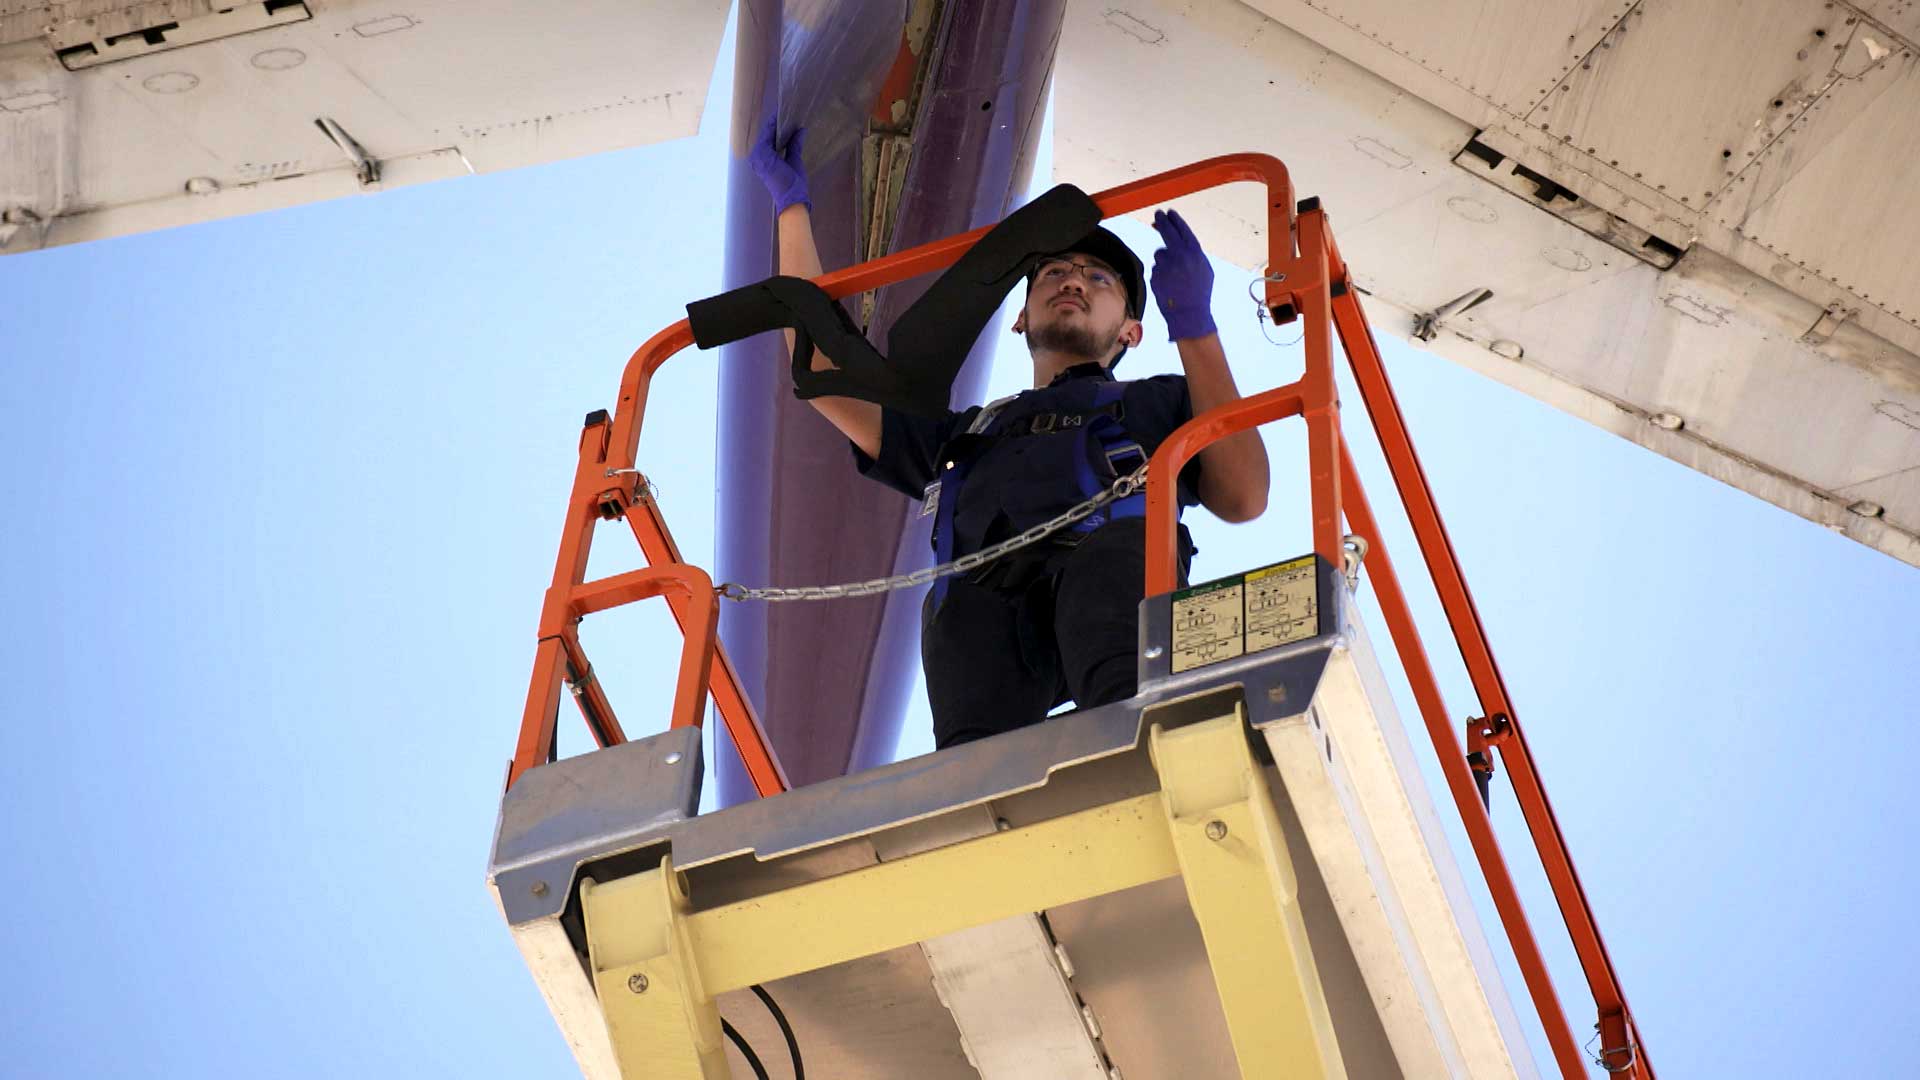 José Pérez, an aviation technology student at Pima Community College, works on a FedEx cargo airplane as part of his training at the college. June 2021. 